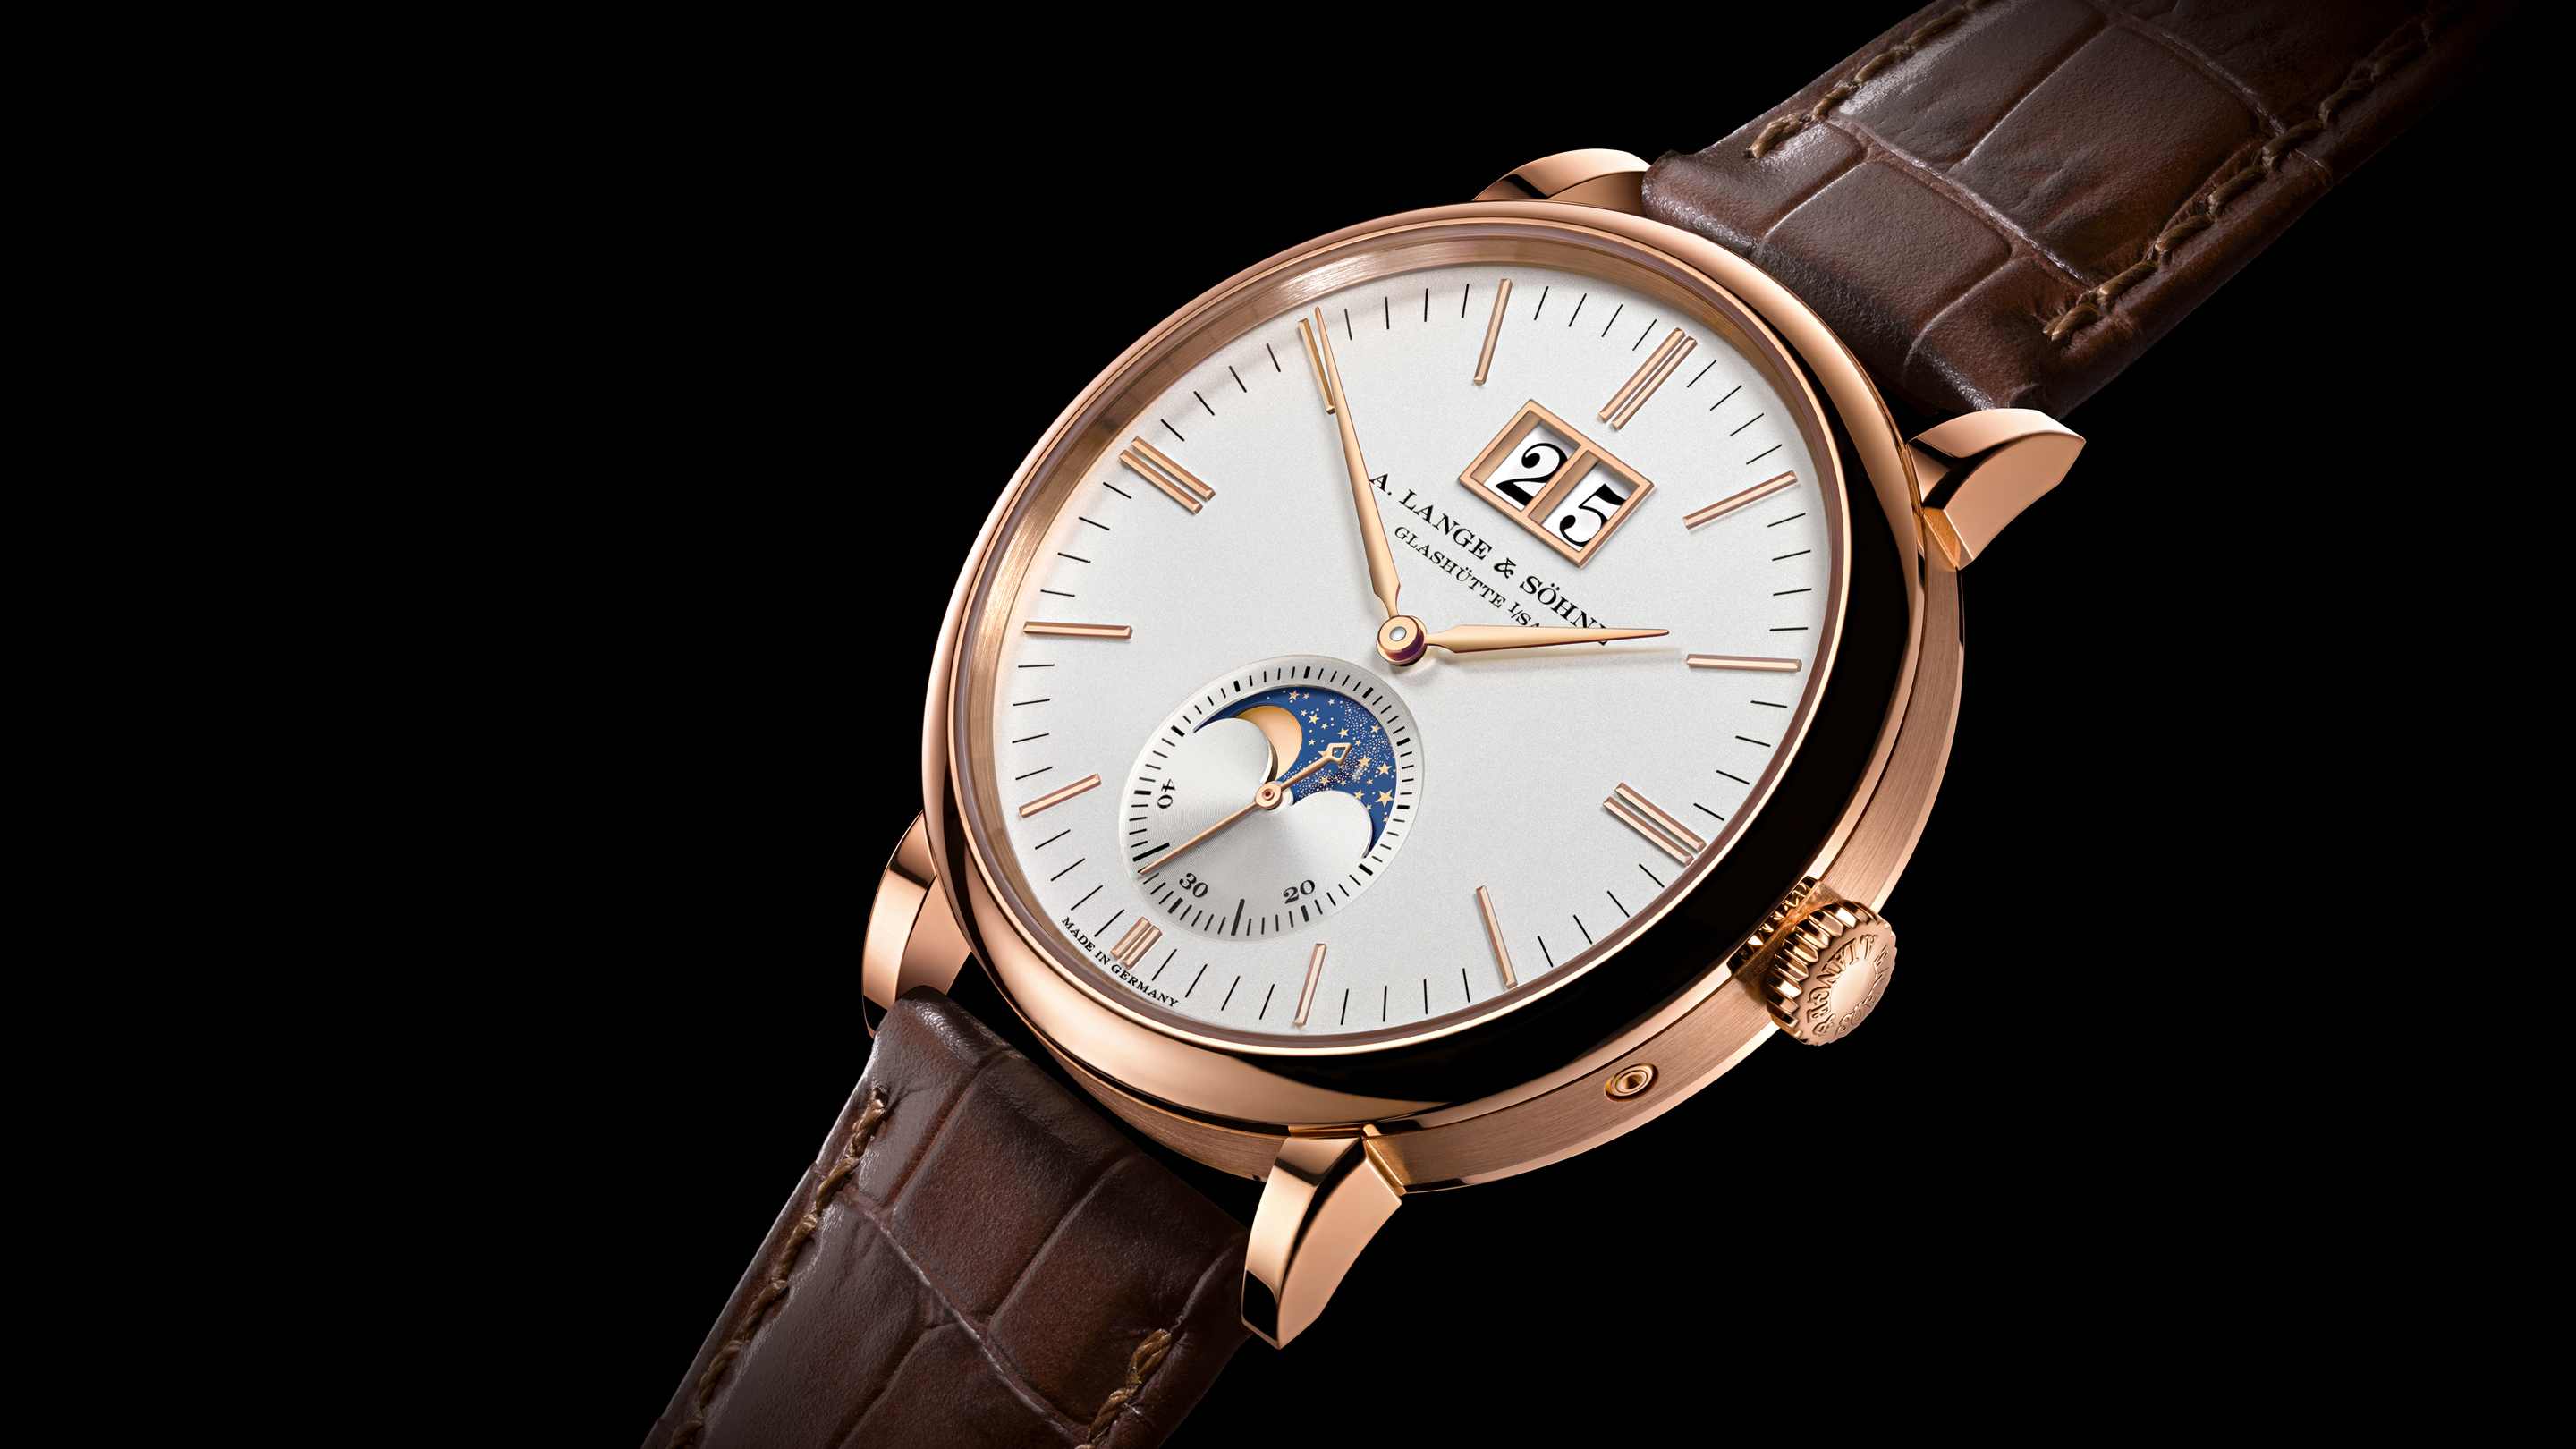 frederique constant runabout moon phase